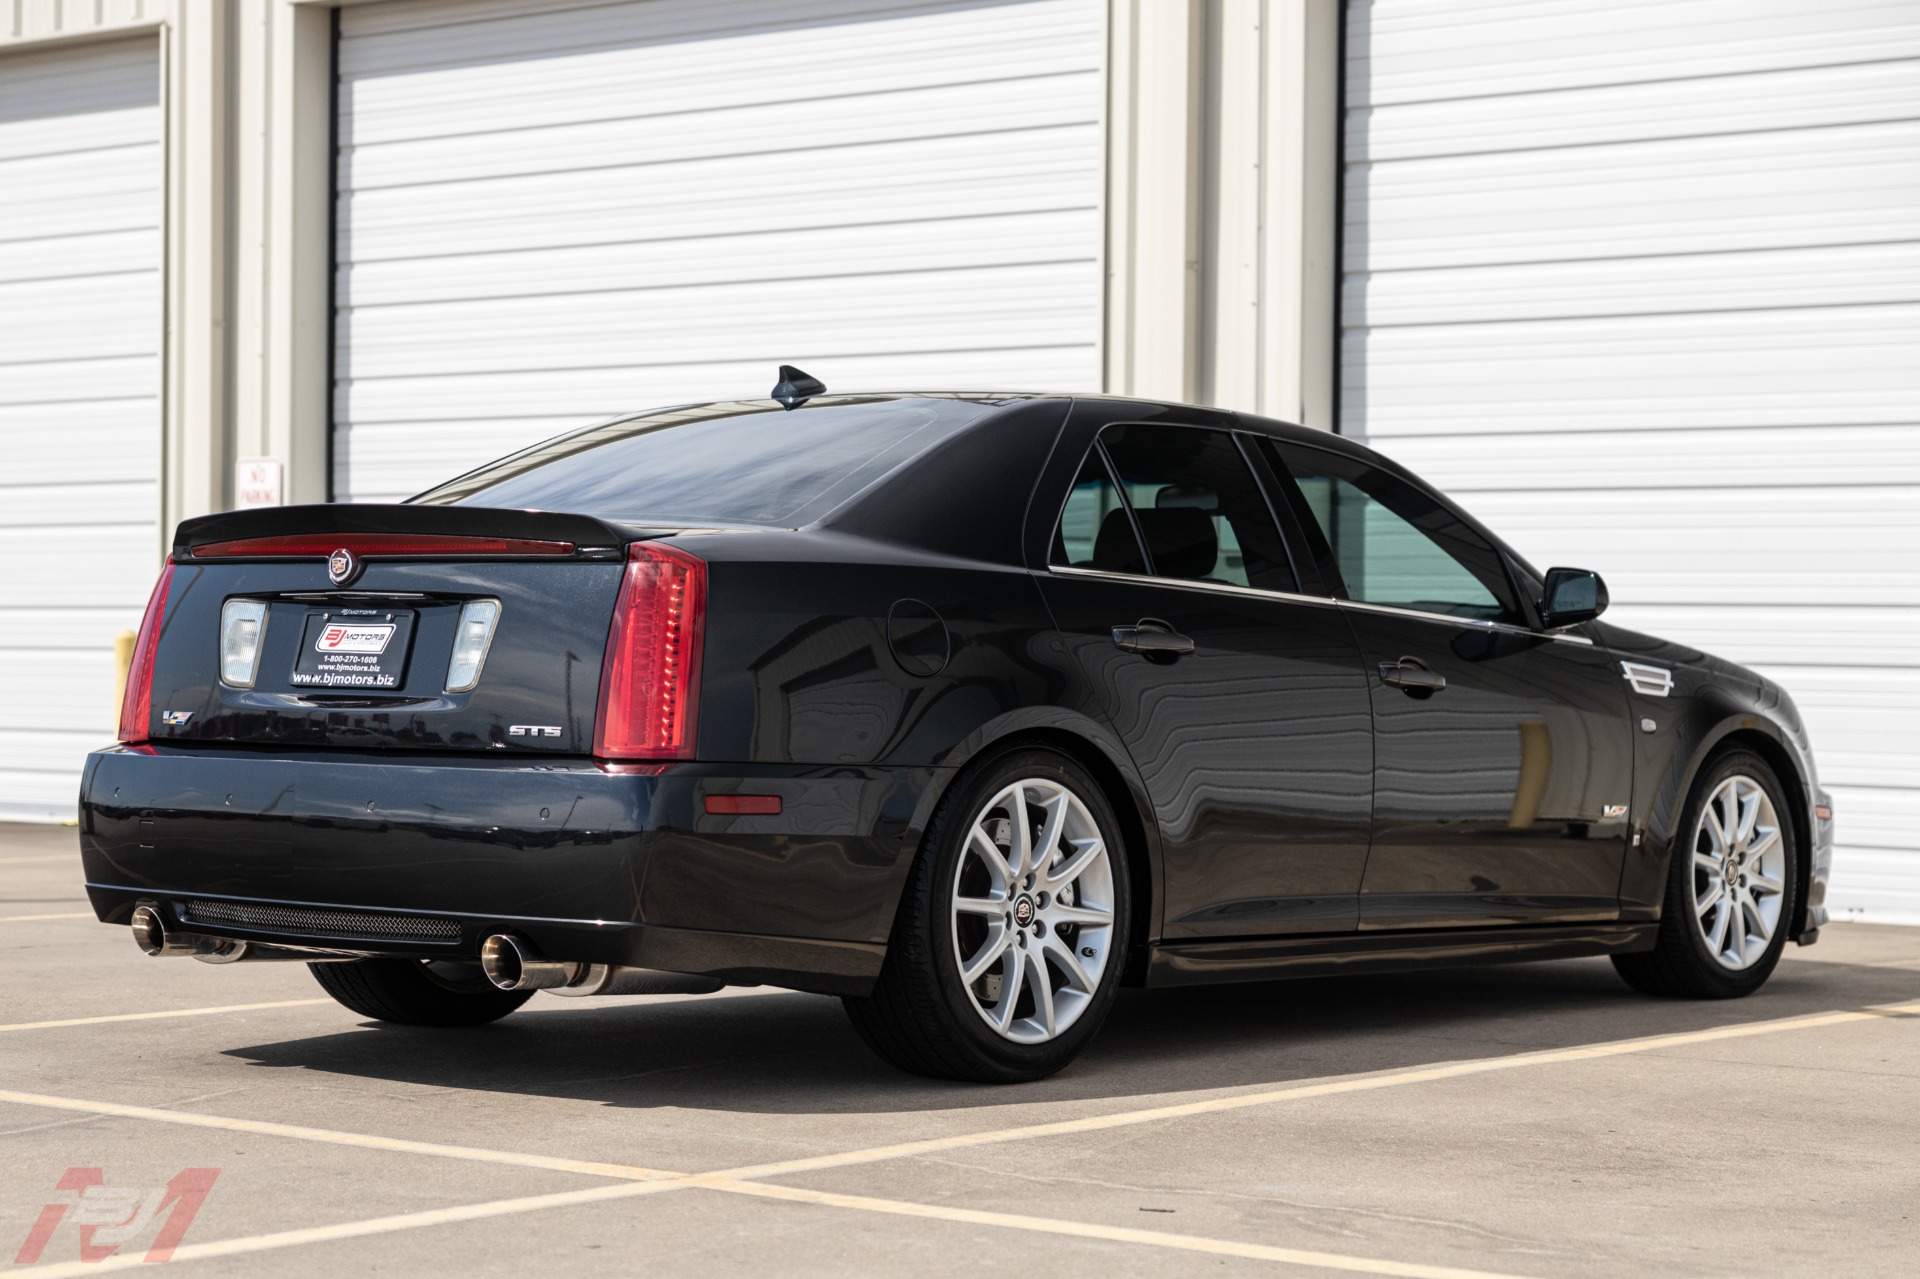 Used 2009 Cadillac STS-V V8 For Sale (Special Pricing) | BJ Motors Stock  #90100089